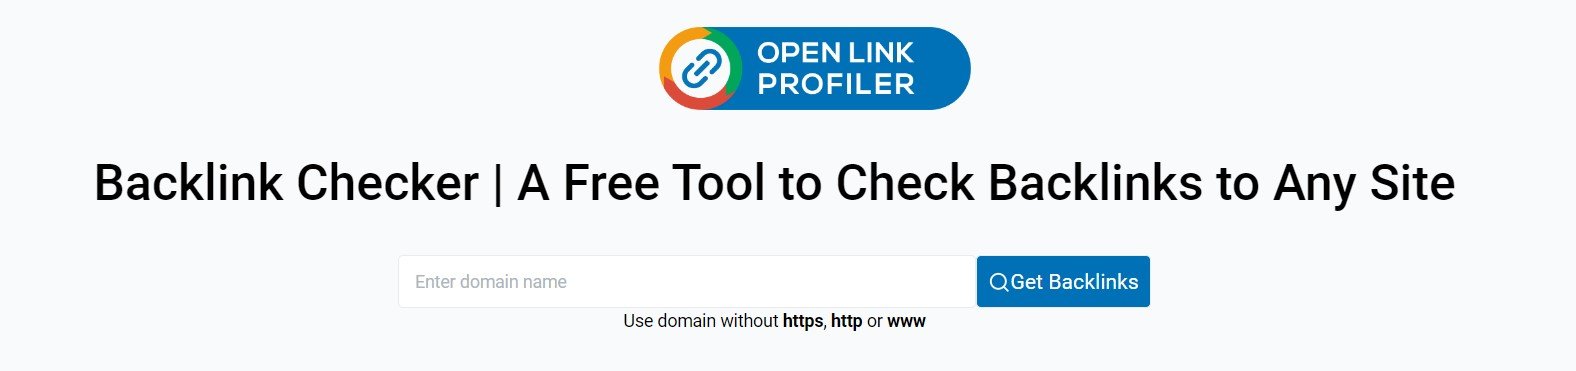 free backlink check tools online